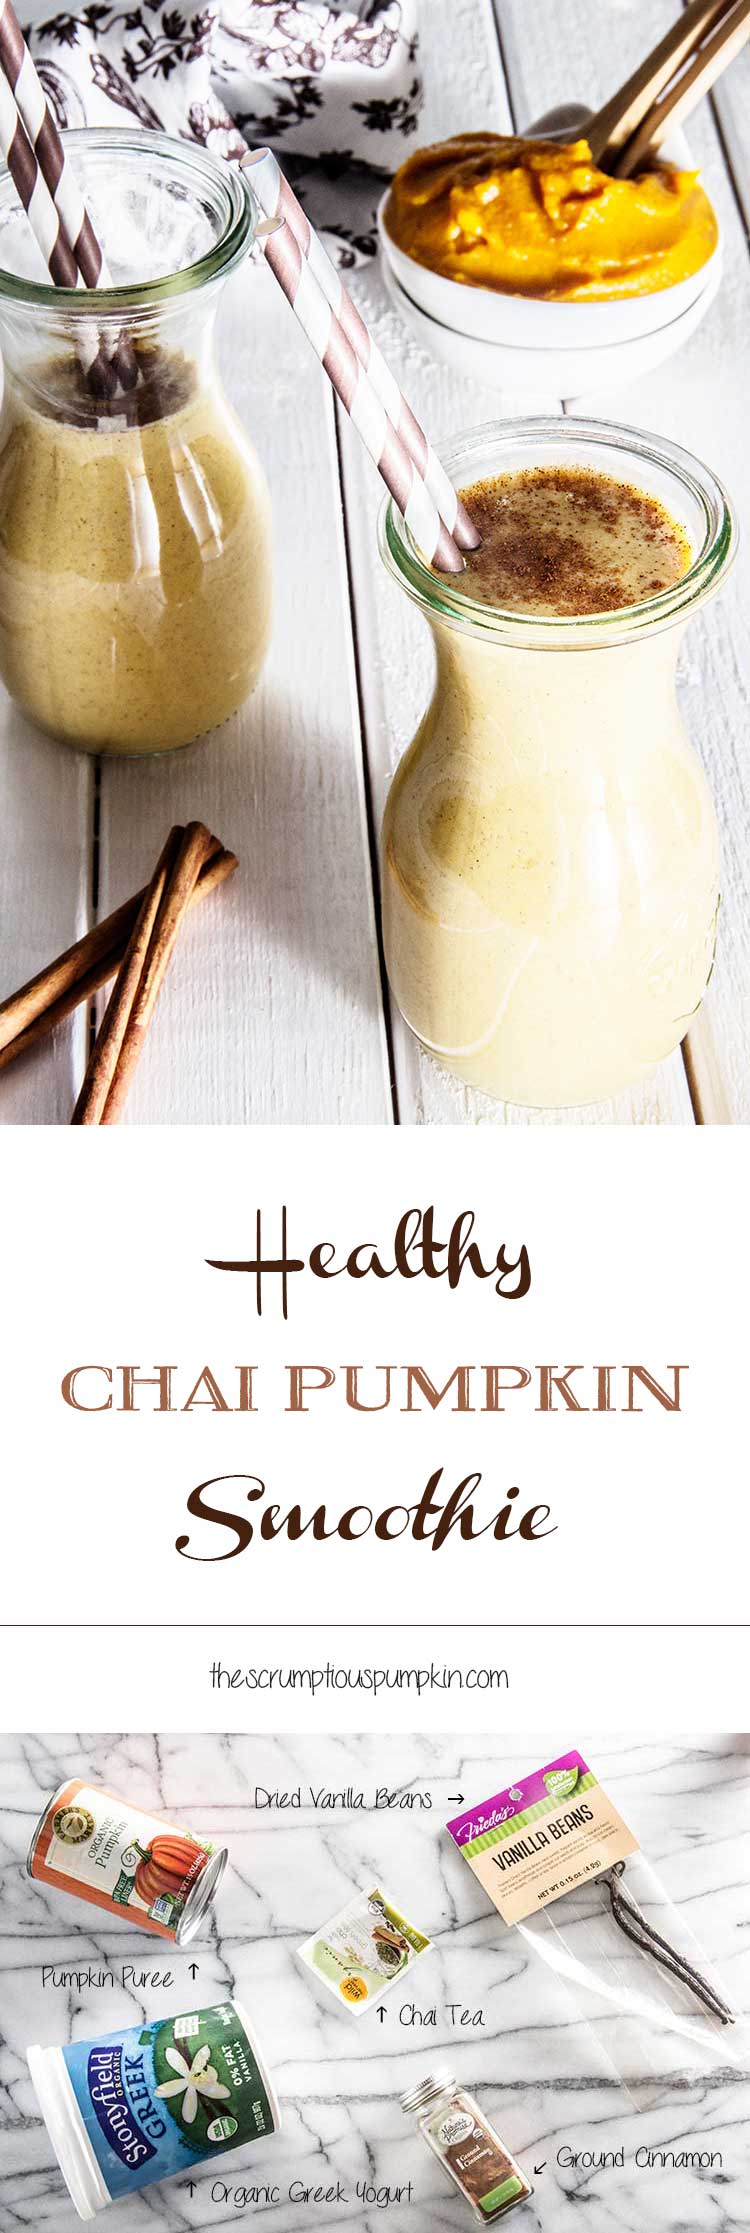 chai-pumpkin-smoothie-easy-to-make-with-five-ingredients